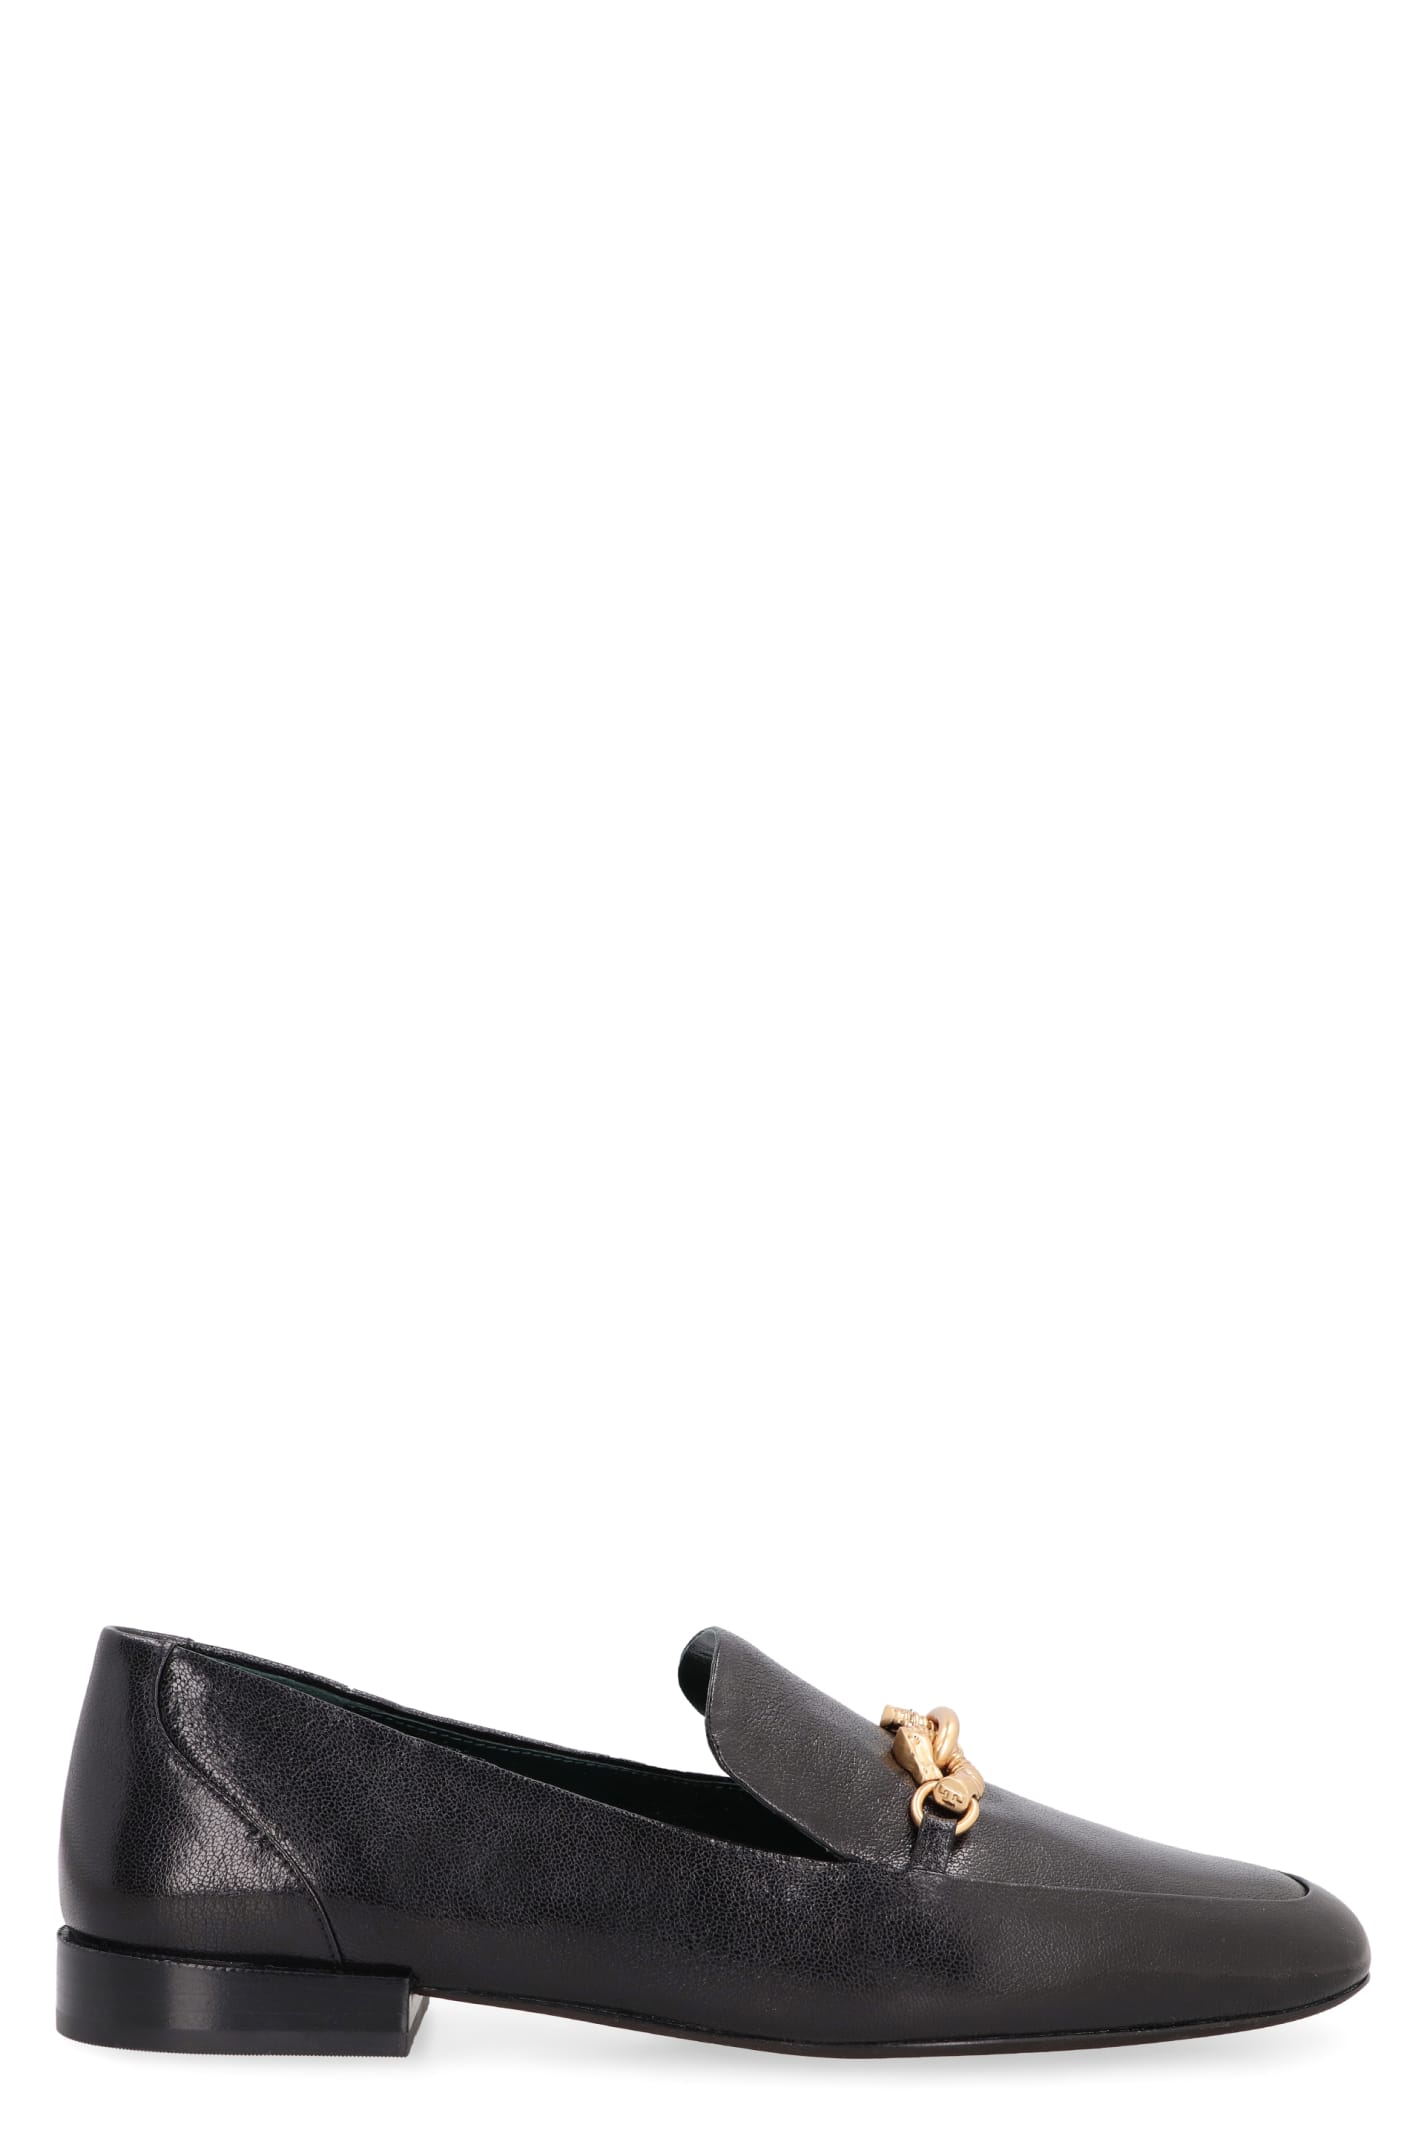 Tory Burch Jessa Leather Loafers In Black